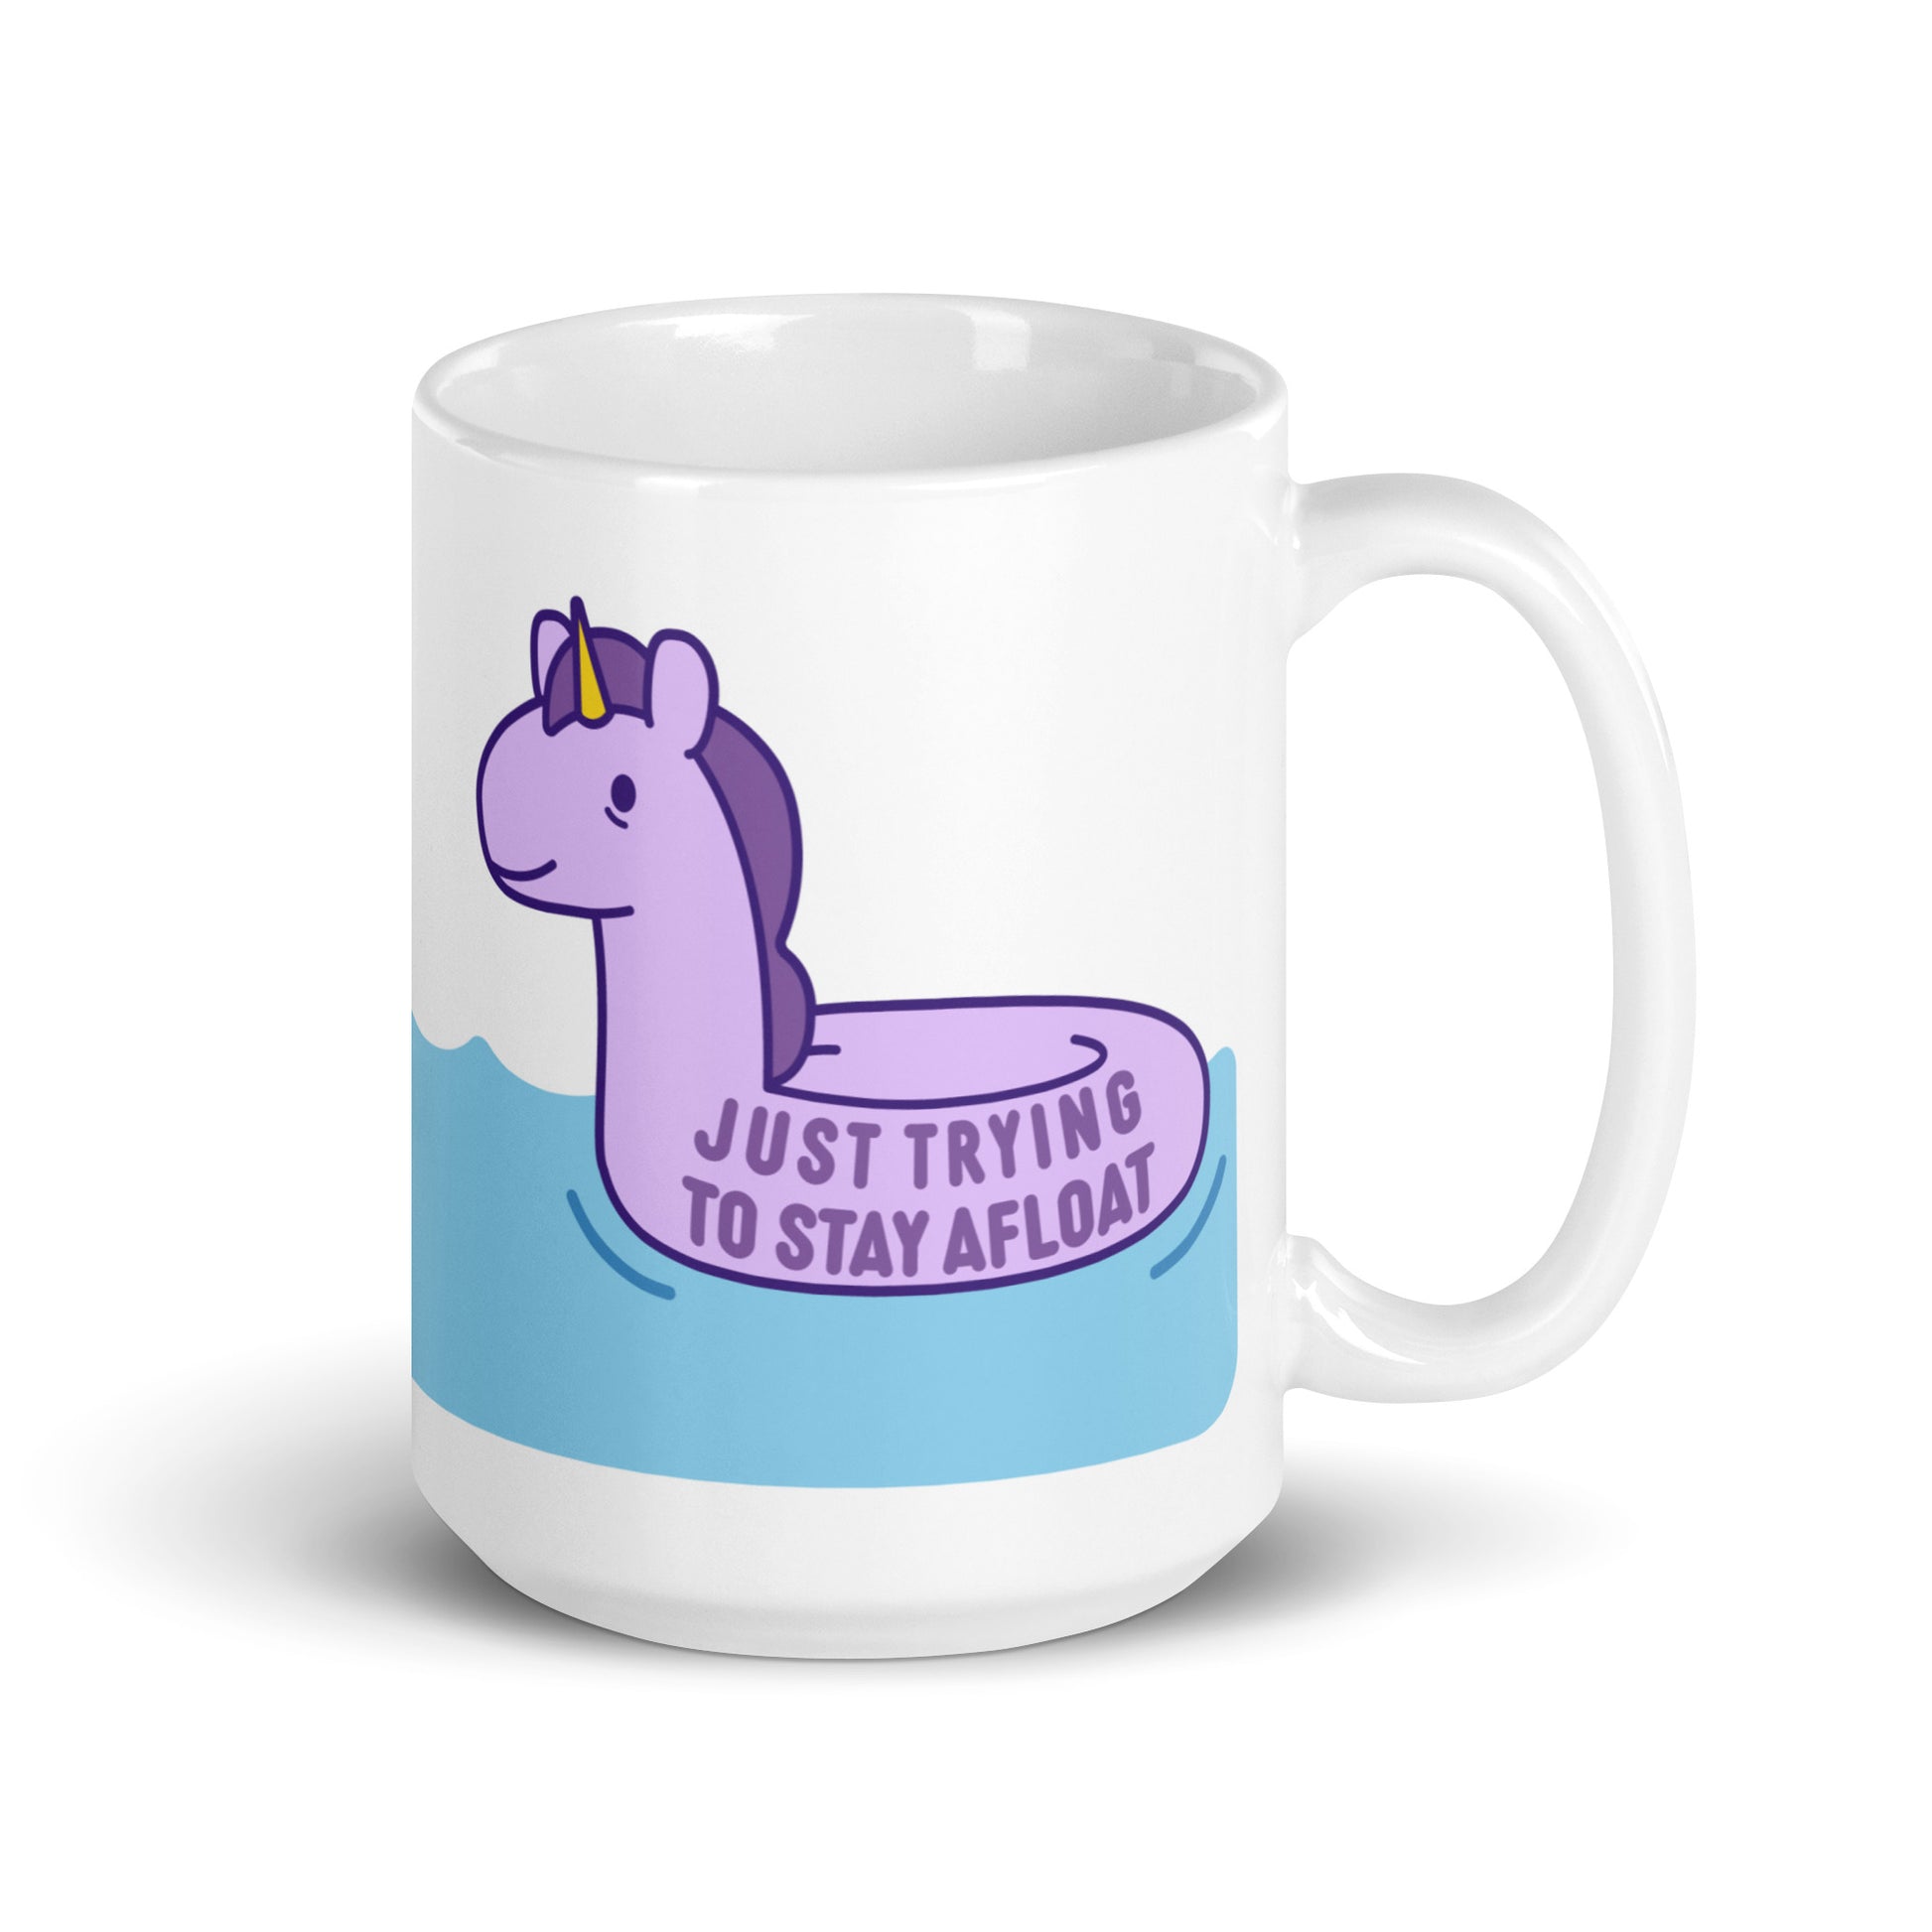 A white 15oz ceramic mug with a purple unicorn pool float floating on water and text reading "Just trying to stay afloat"